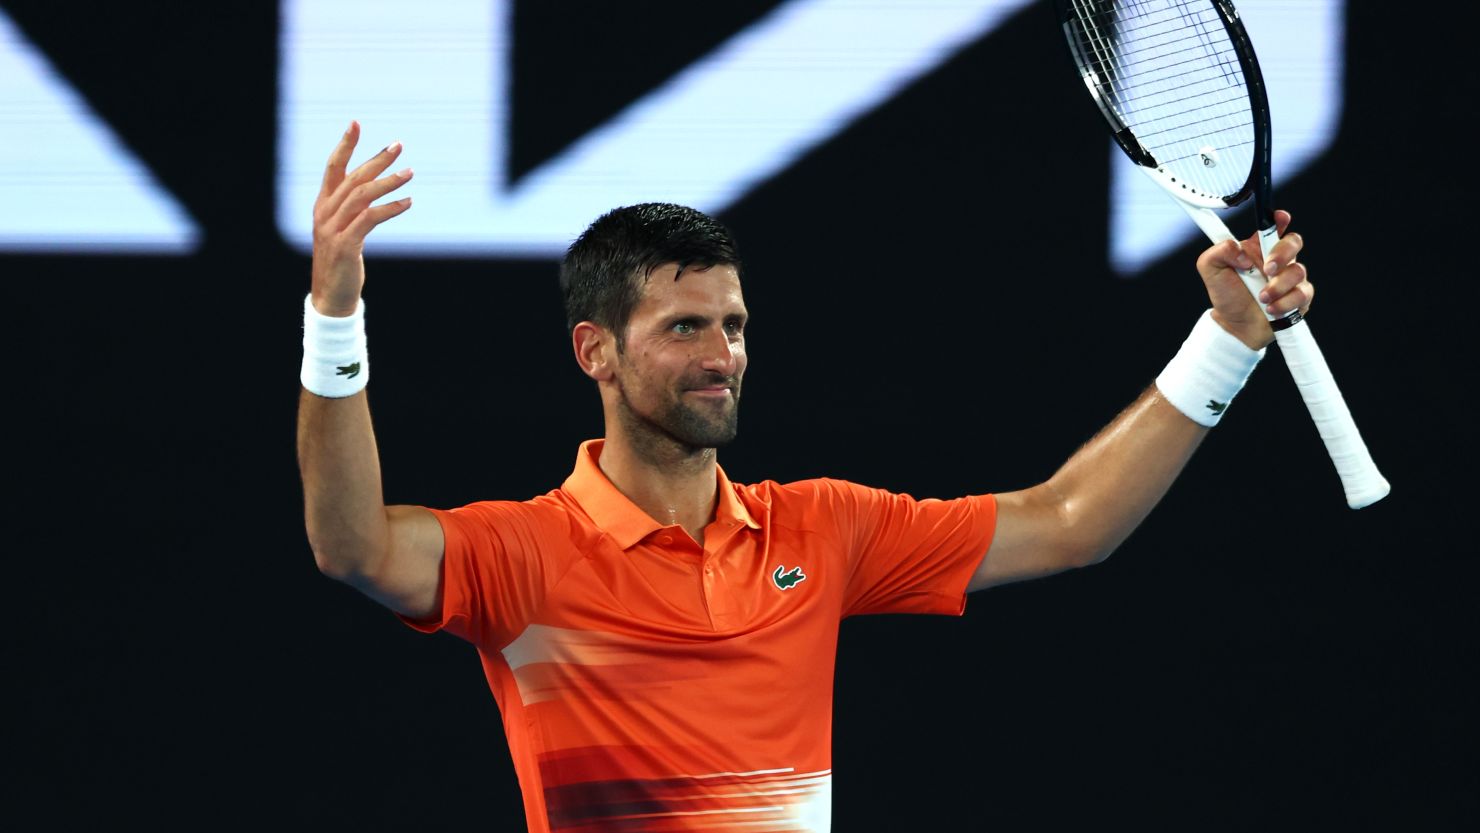 Djokovic secures year-end top ranking for a record-extending 8th